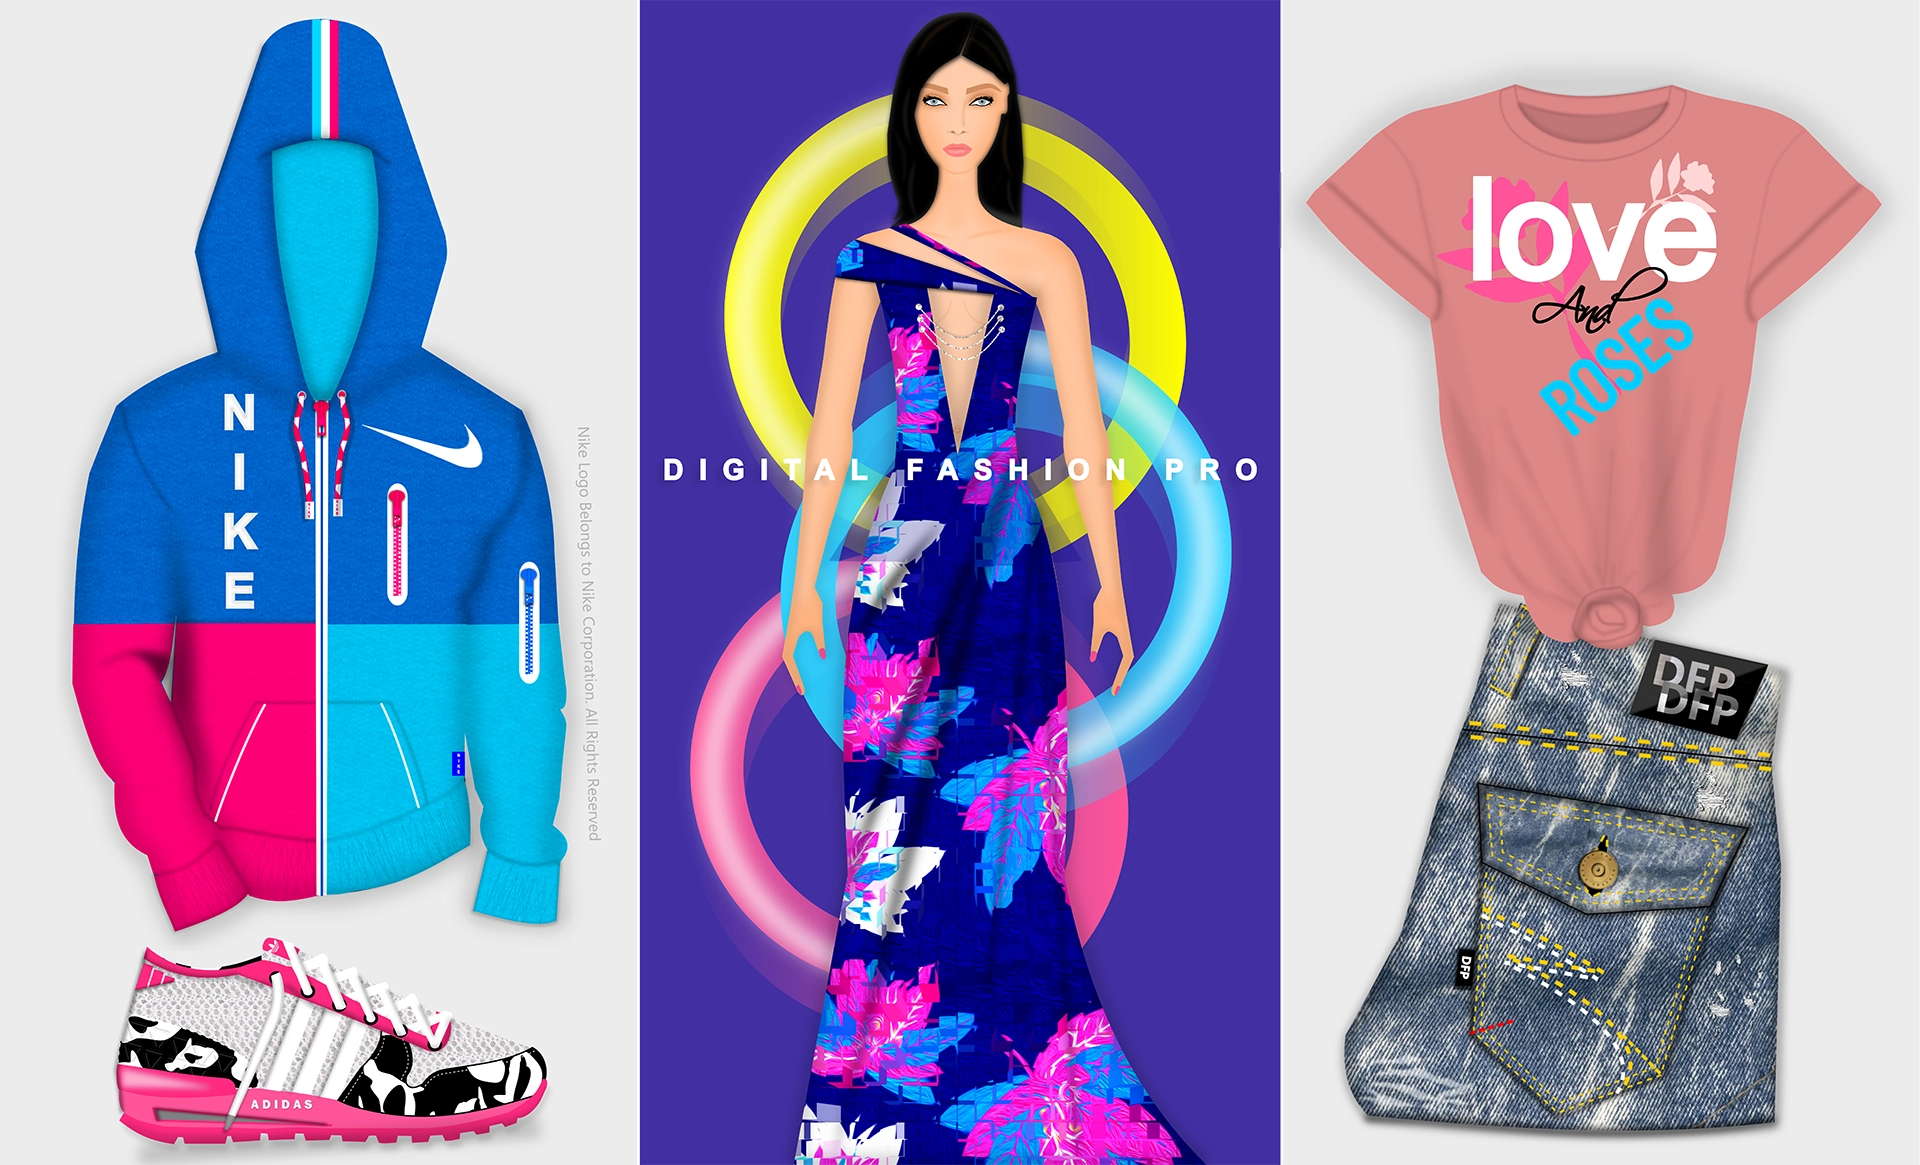 fashion design software - digital fashion pro - design your own clothing - glow- 3 outfits